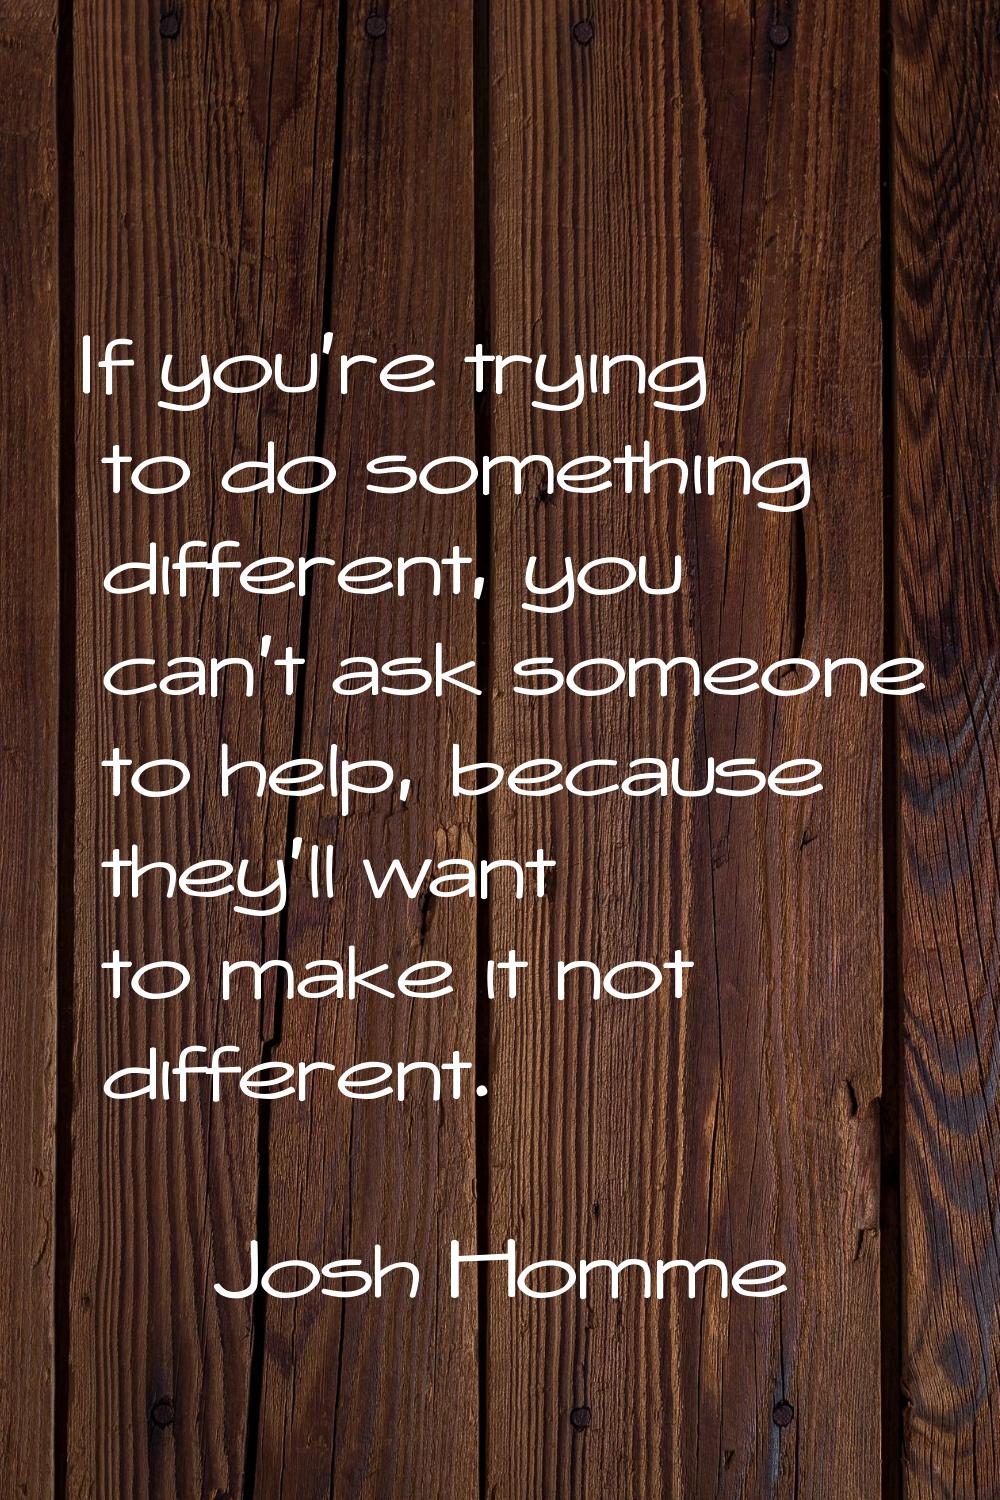 If you're trying to do something different, you can't ask someone to help, because they'll want to 